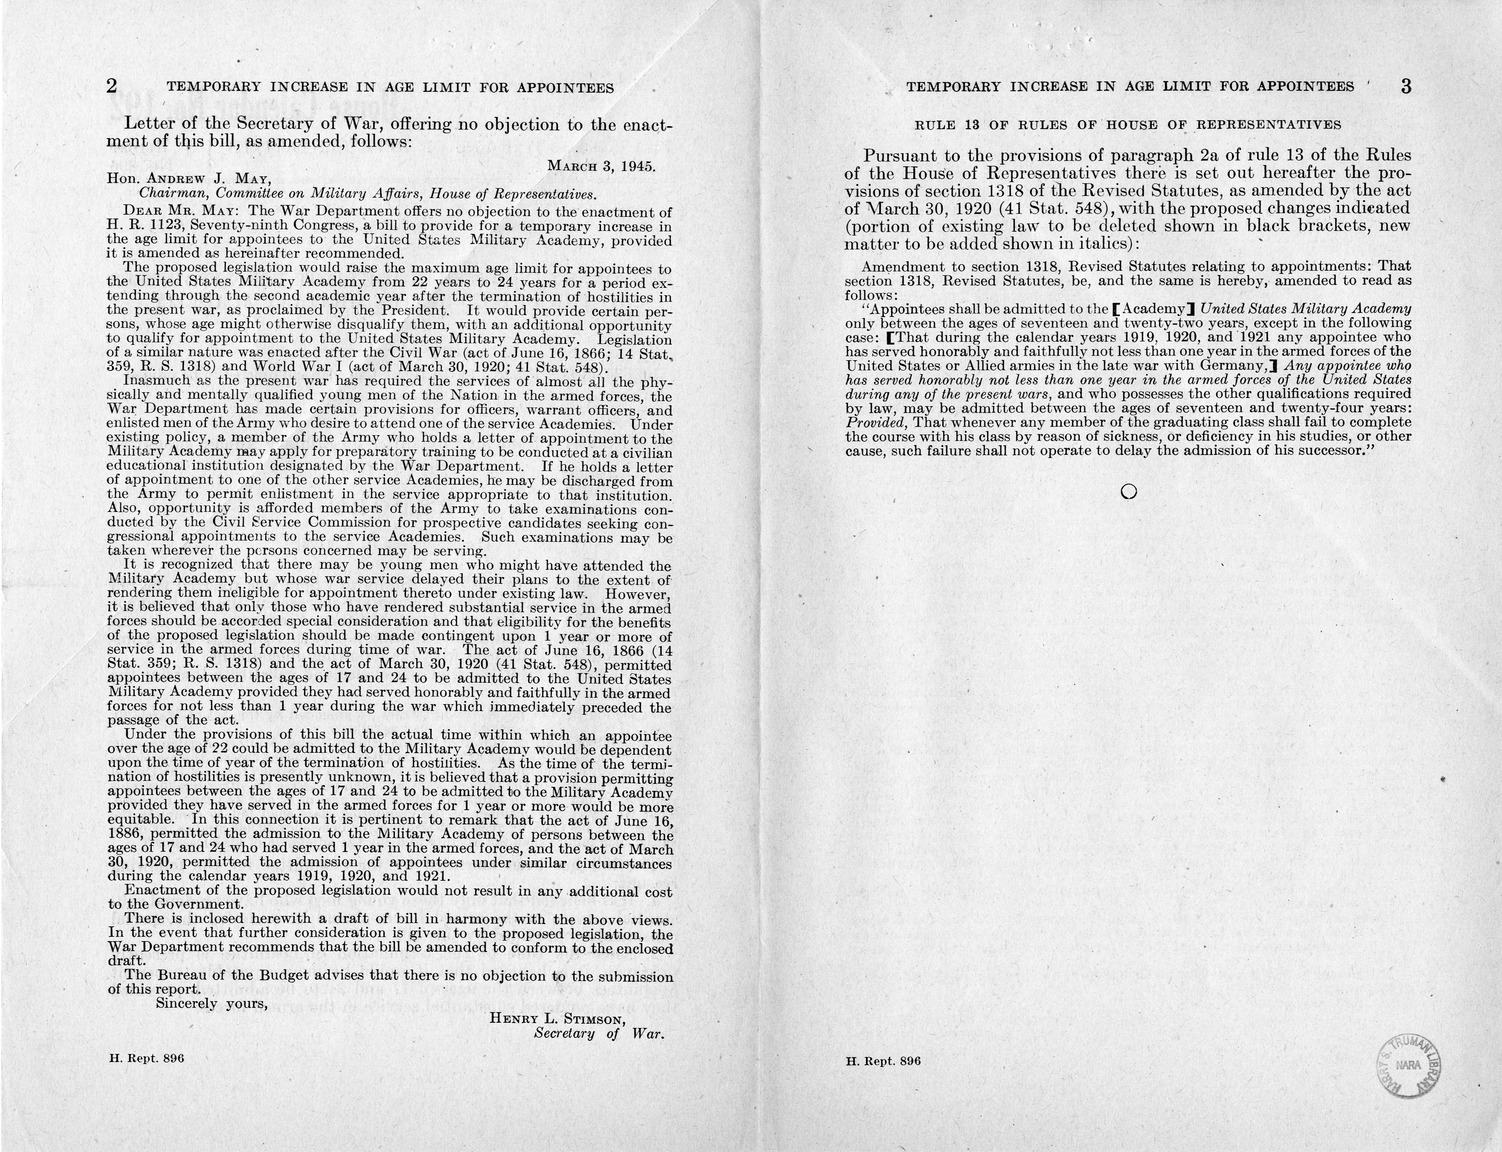 Memorandum from Frederick J. Bailey to M. C. Latta, H.R. 1123, To Provide for a Temporary Increase in the Age Limit for Appointees to the United States Military Academy and the United States Naval Academy, with Attachments